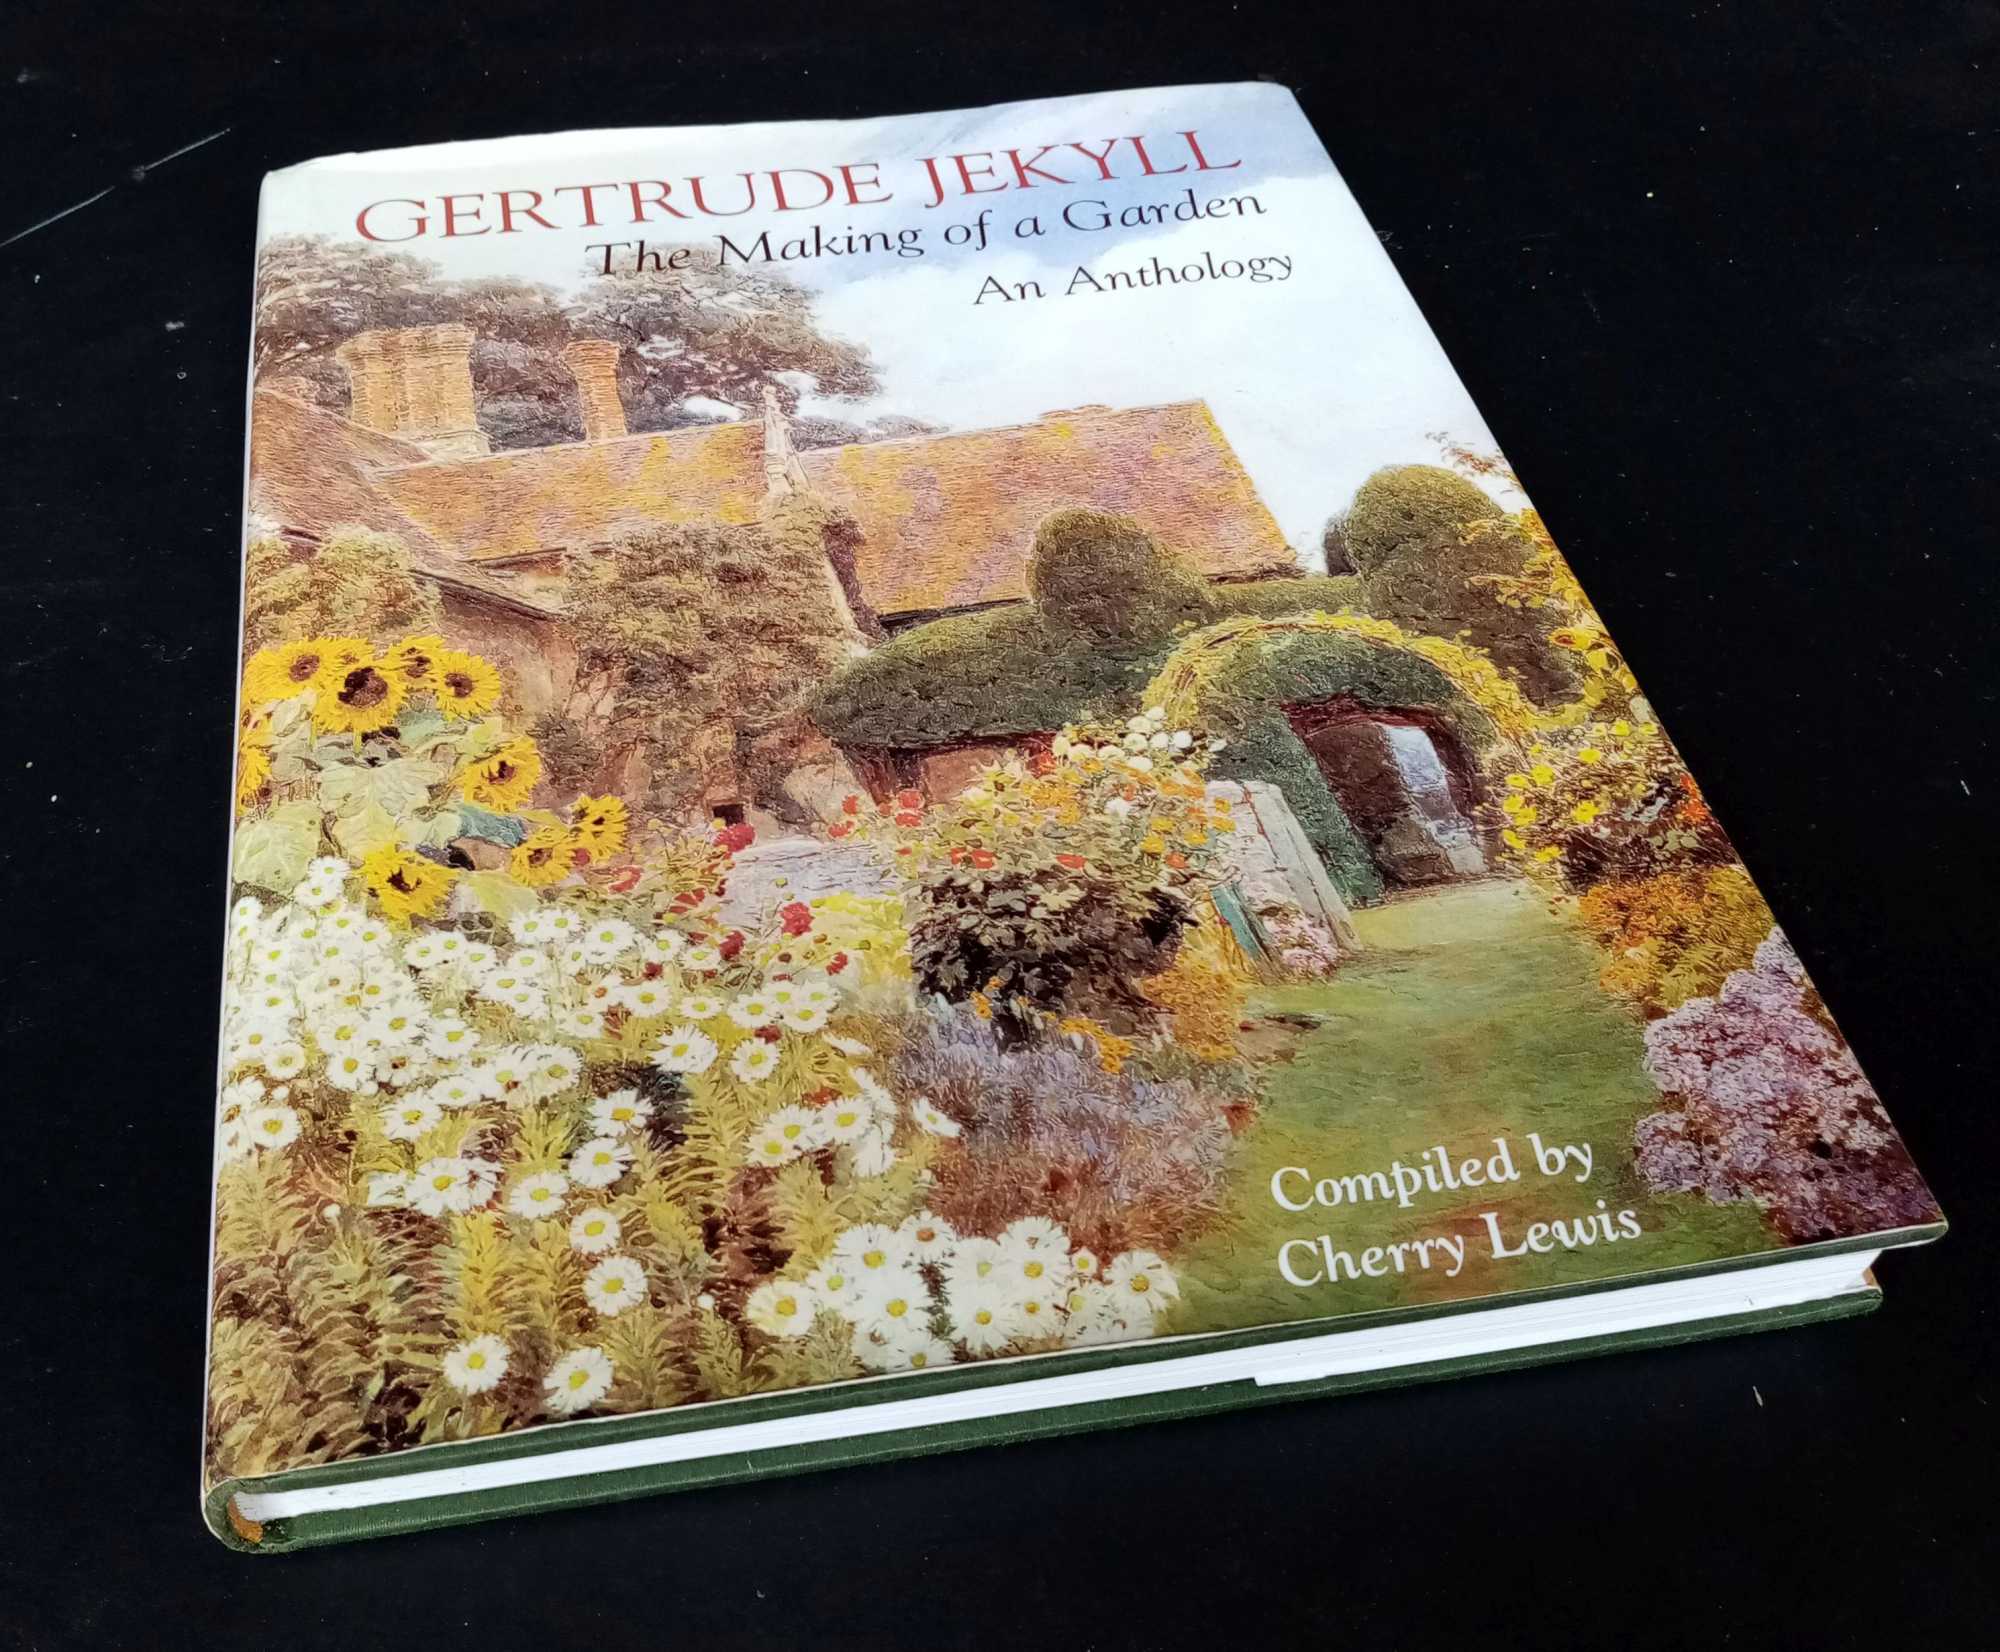 Gertrude Jekyll - Gertrude Jekyll: The Making of a Garden. An Anthology 